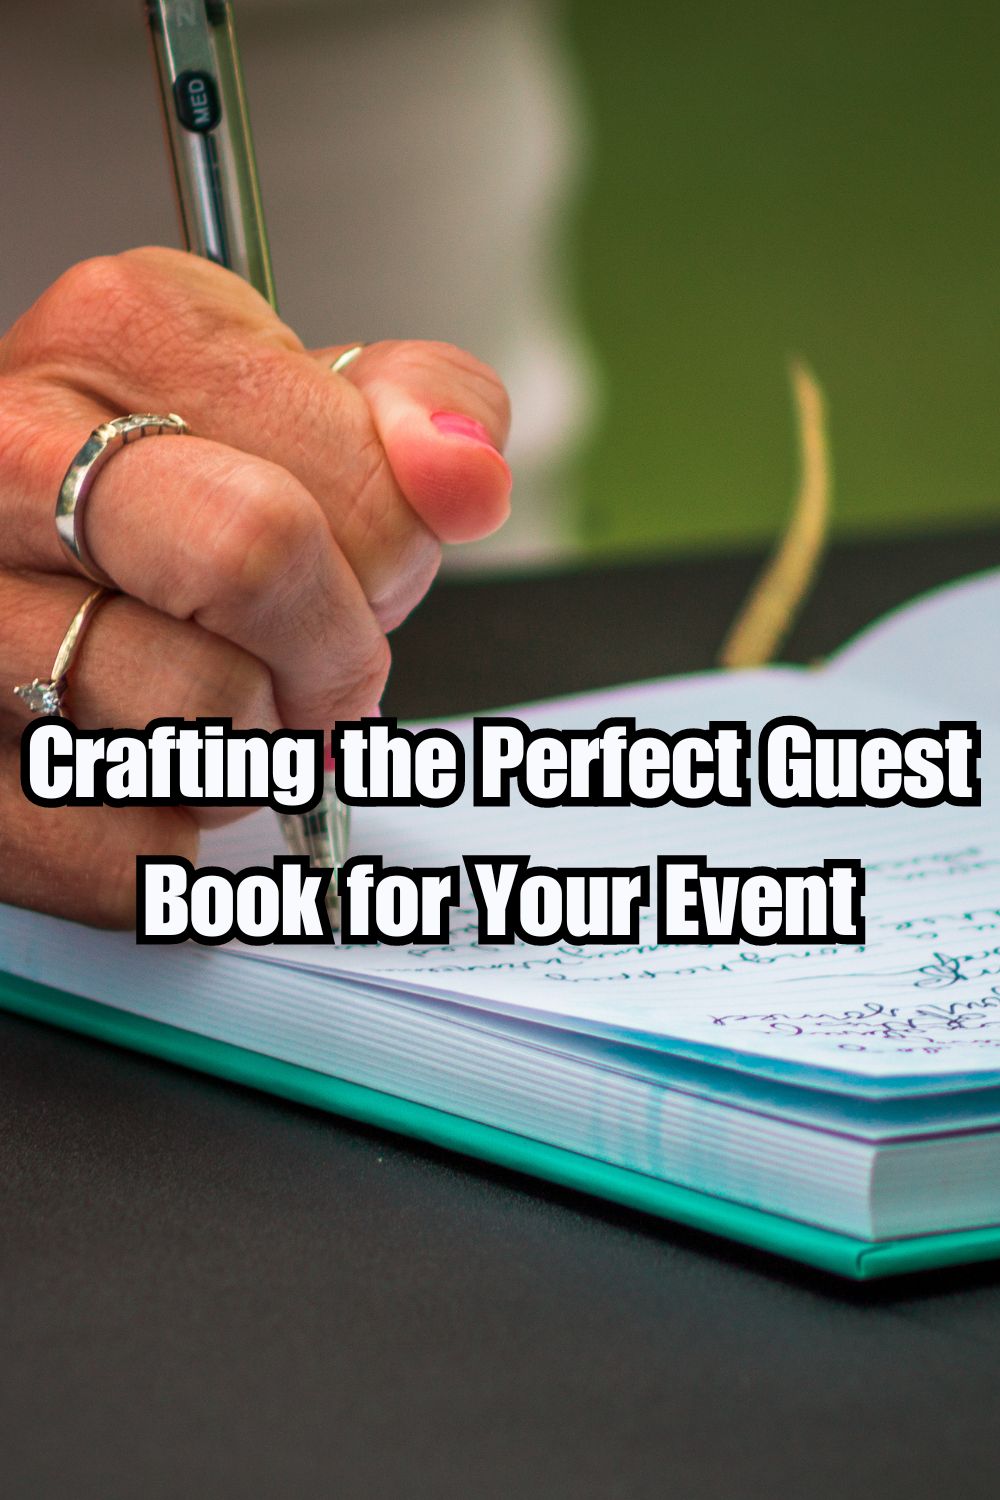 Crafting the Perfect Guest Book for Your Event